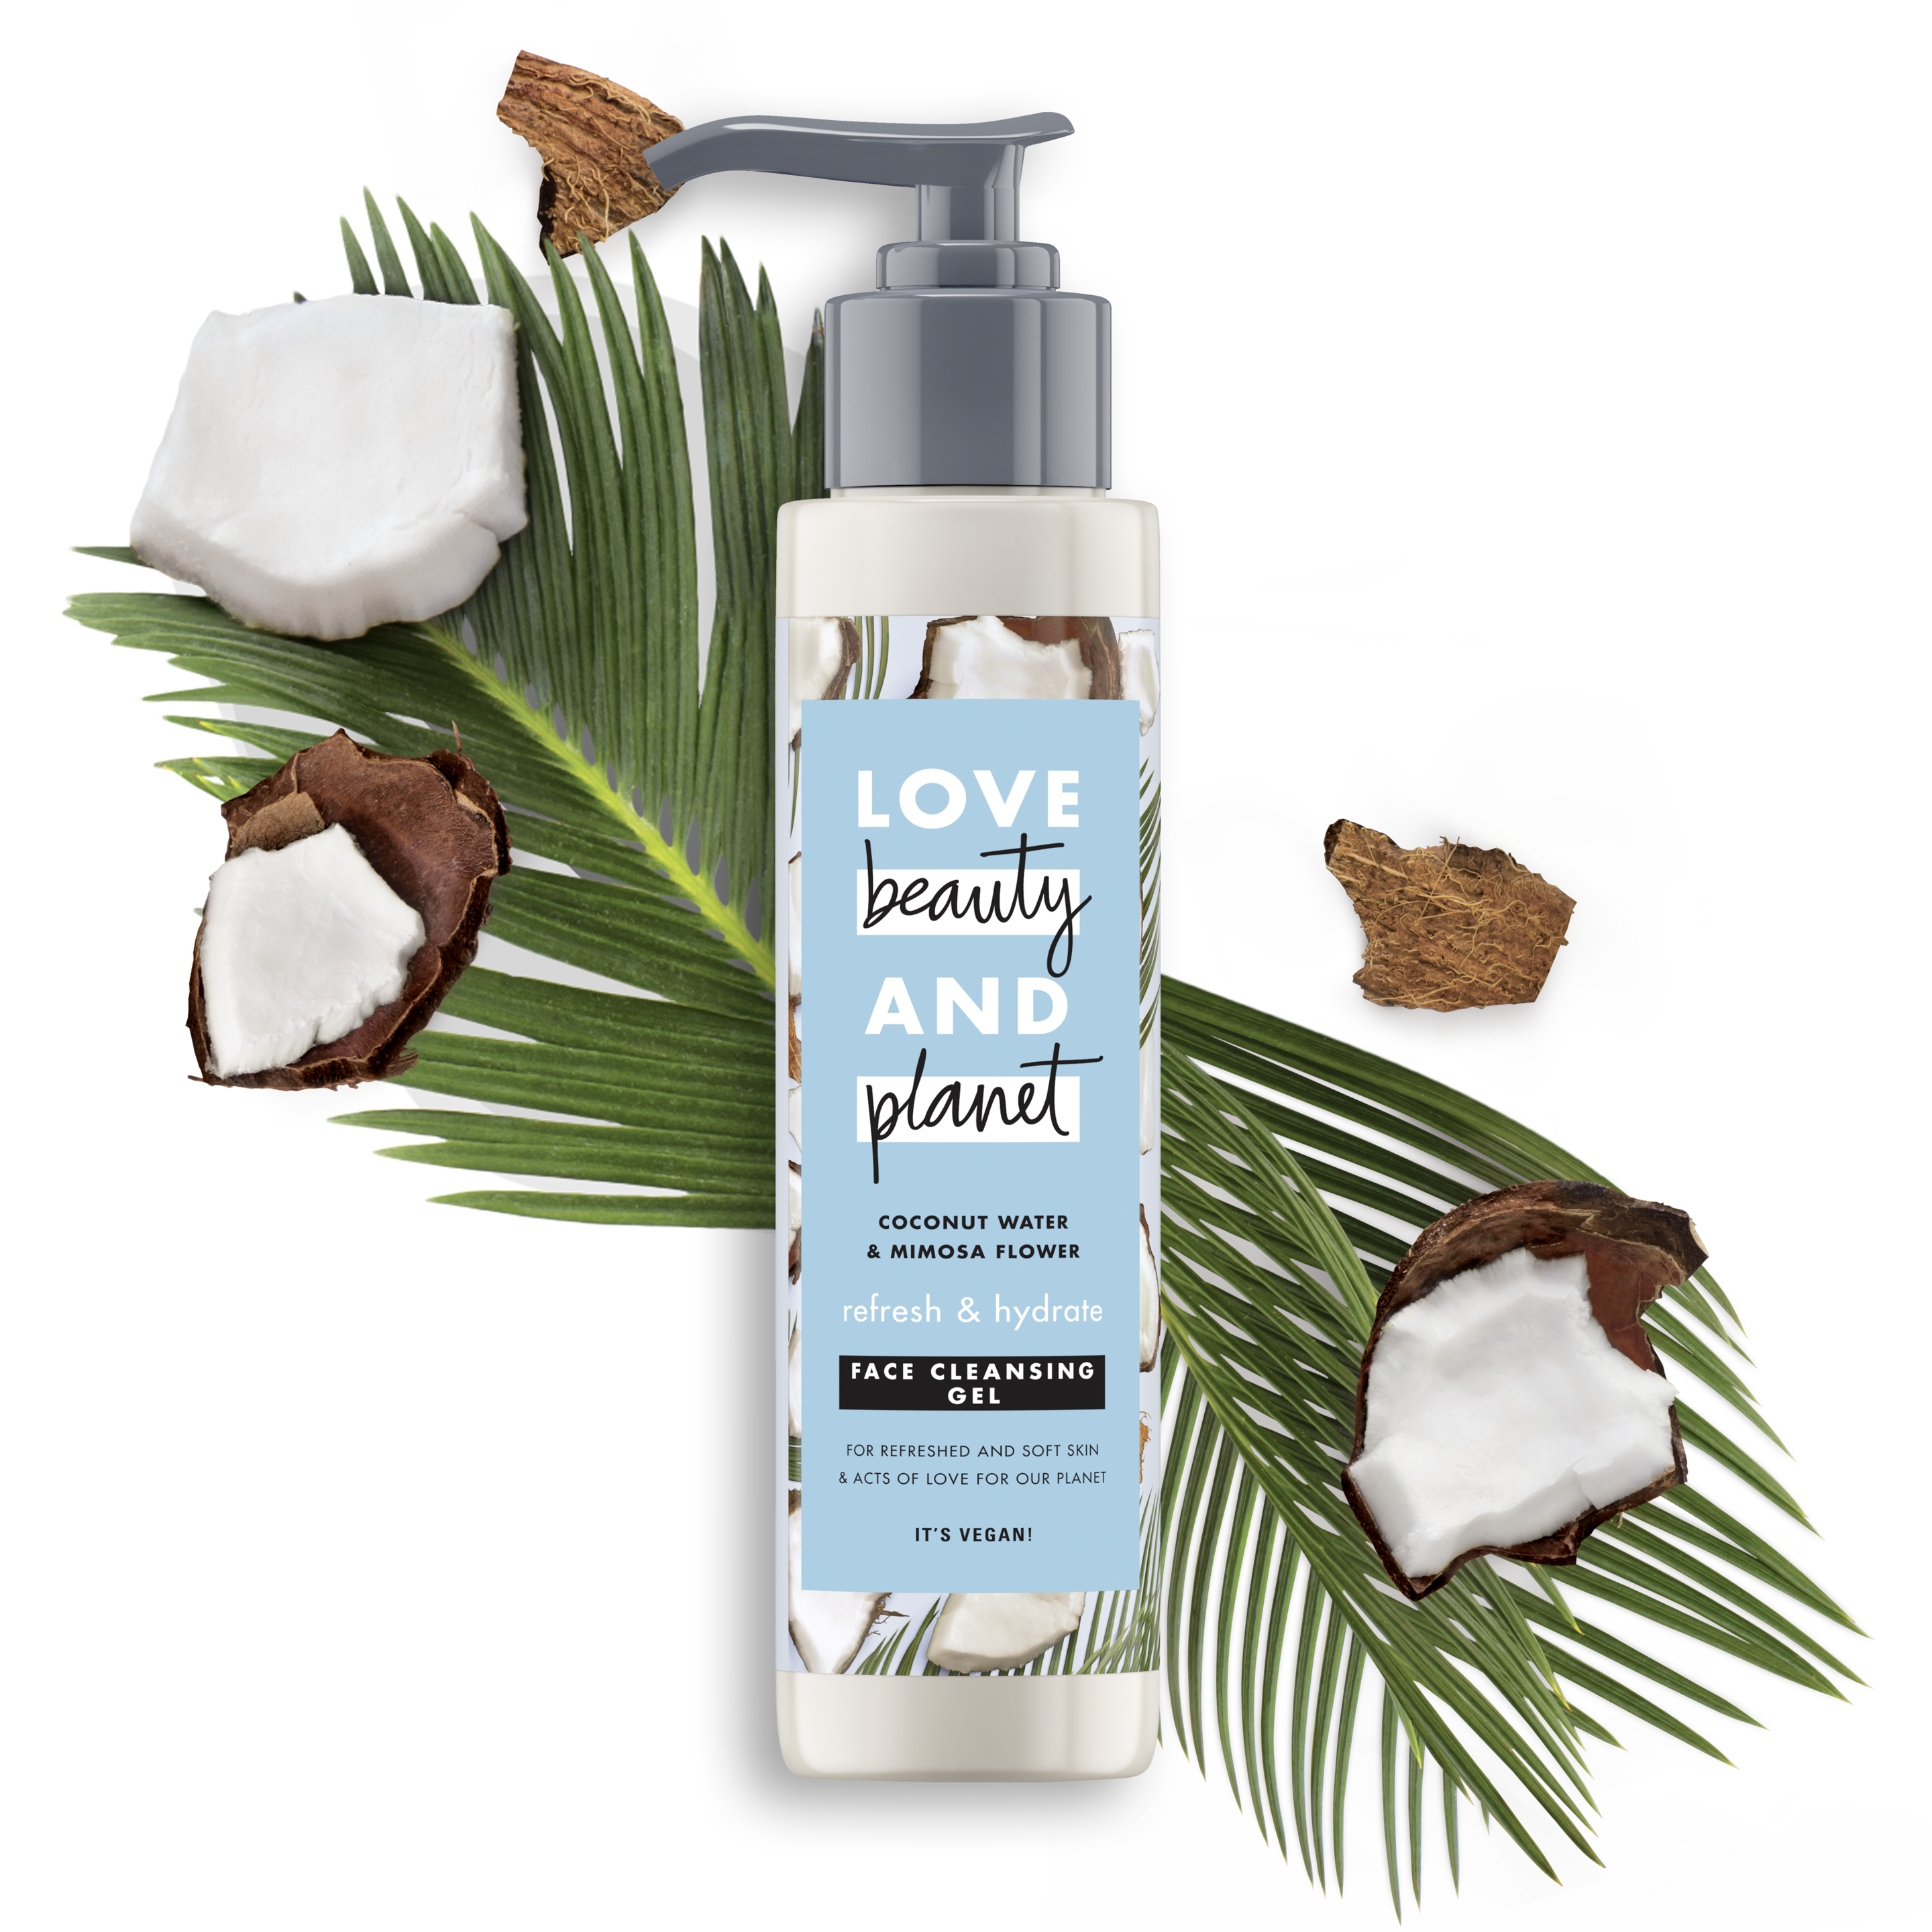 Front of face cleansing gel pack Coconut Water & Mimosa Face Cleansing Gel Refresh & Hydrate 125ml